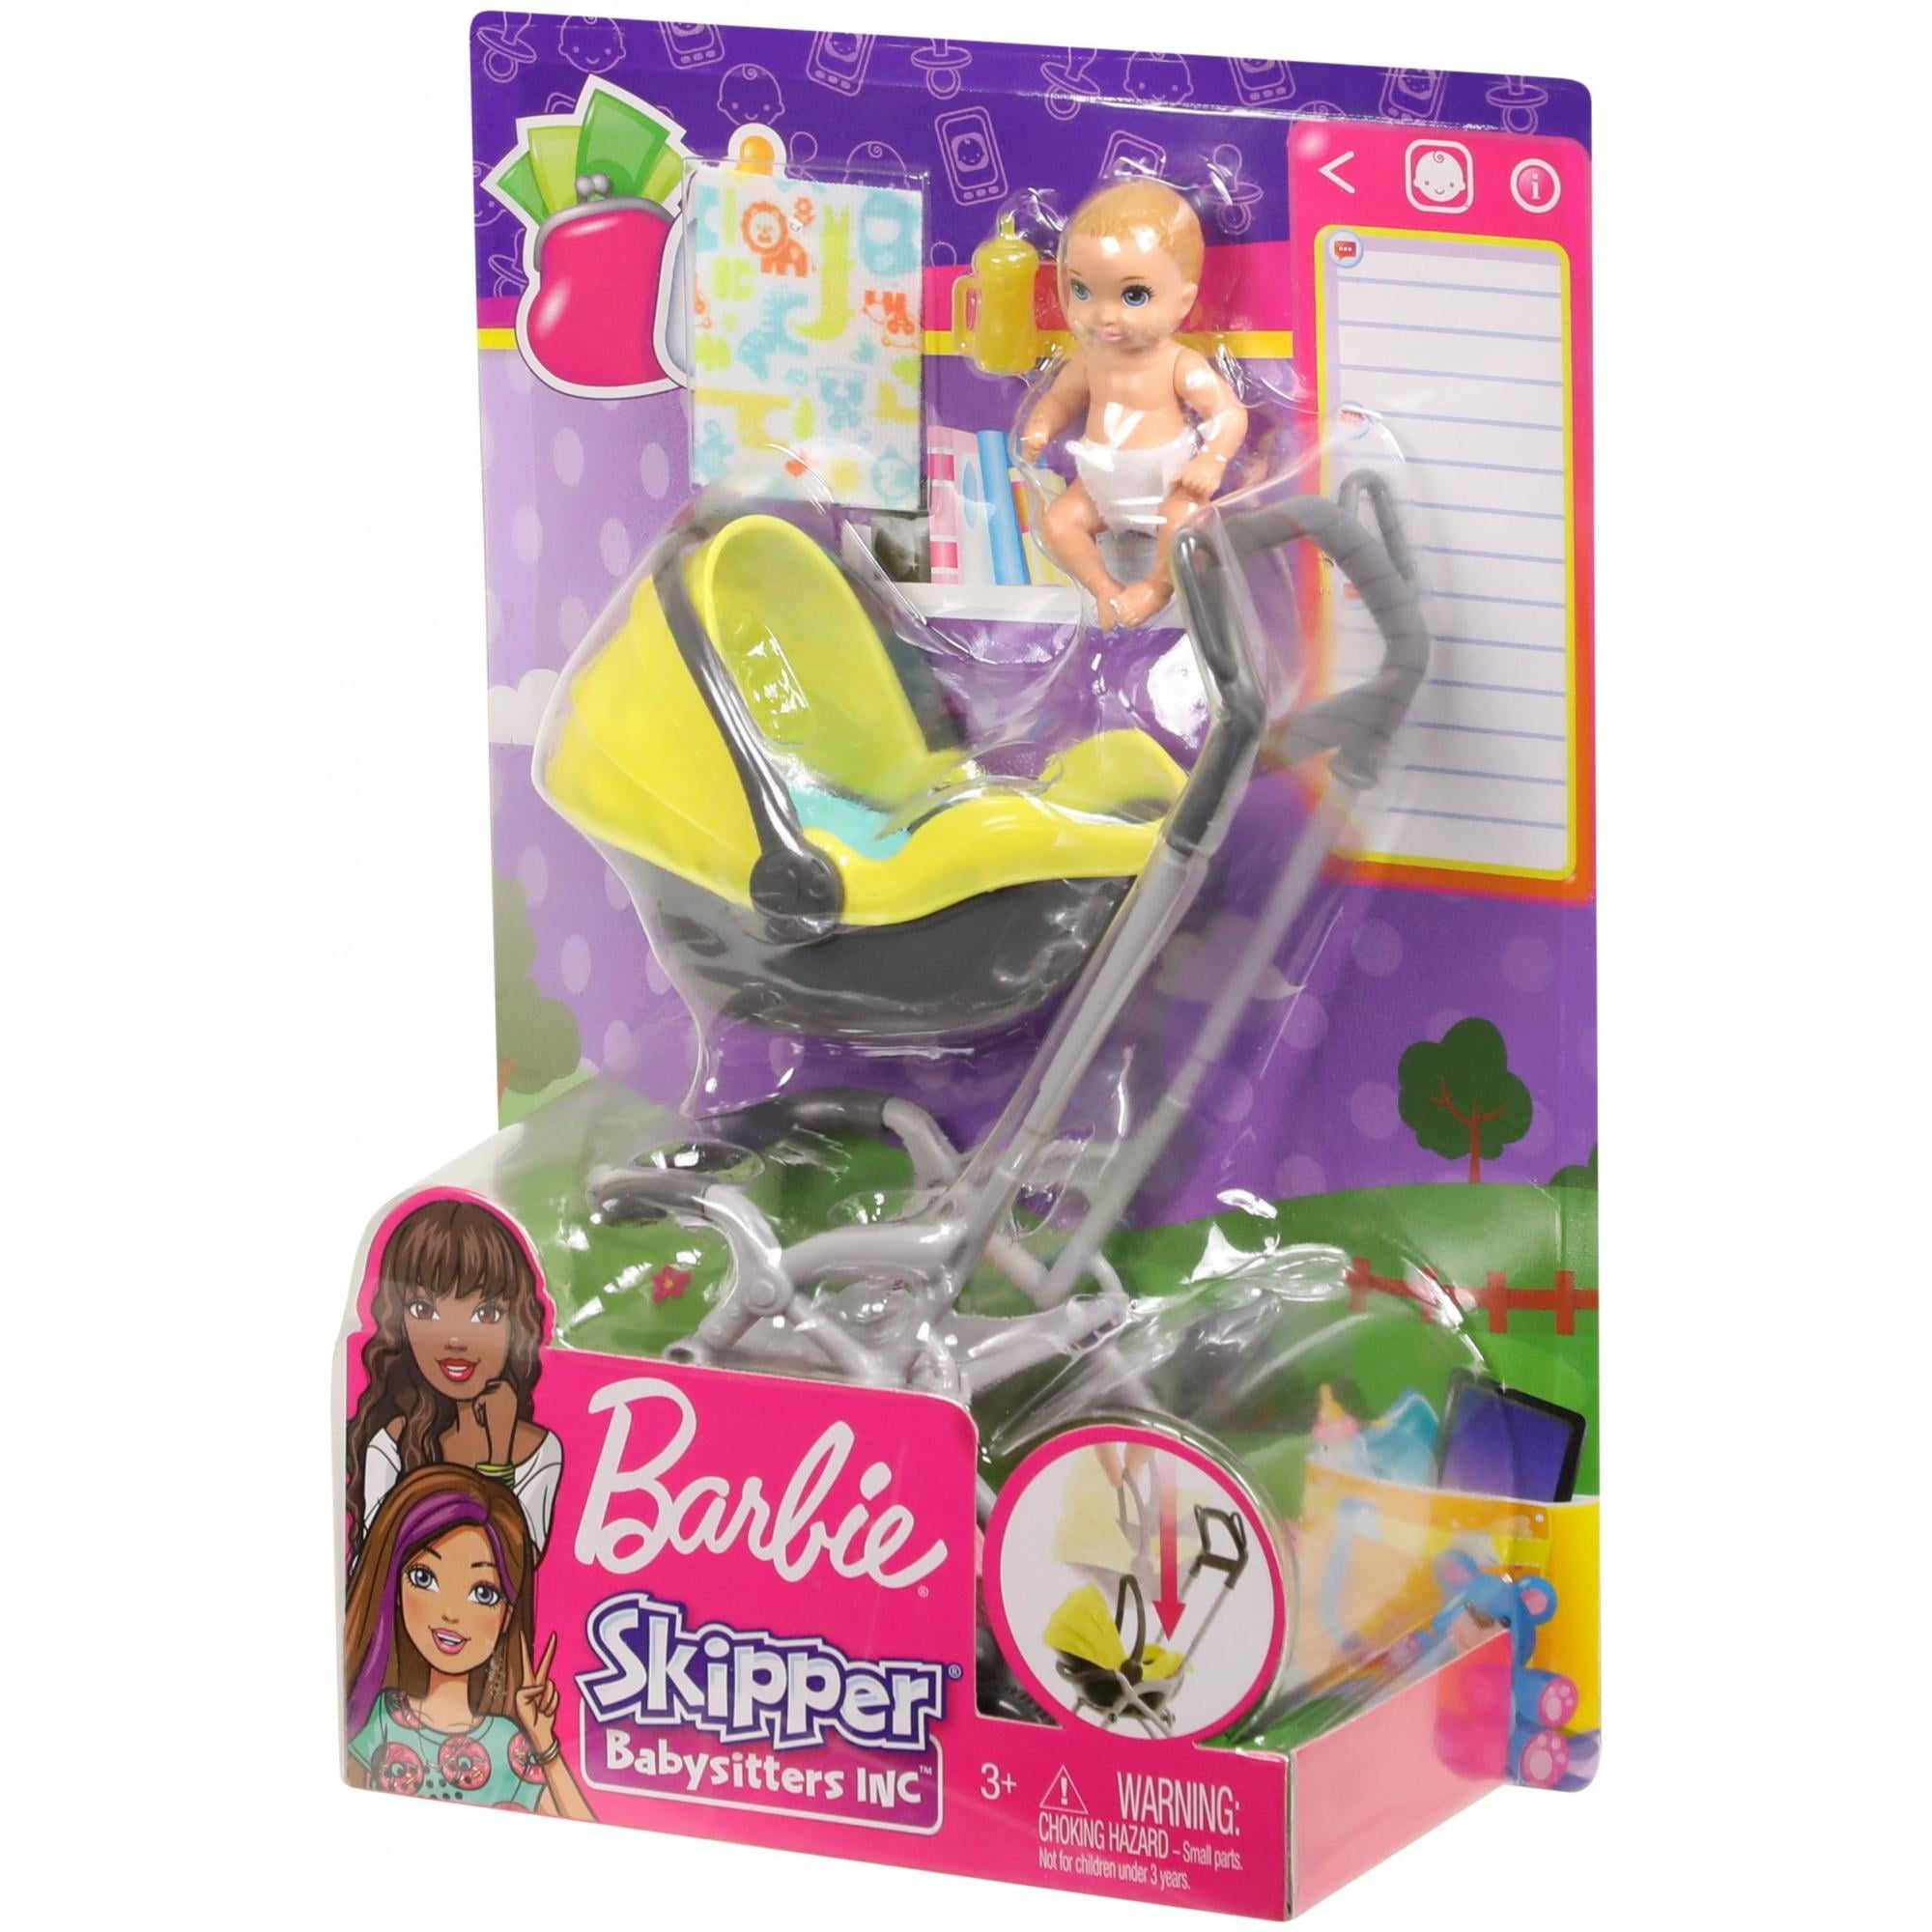 barbie stroller with car seat